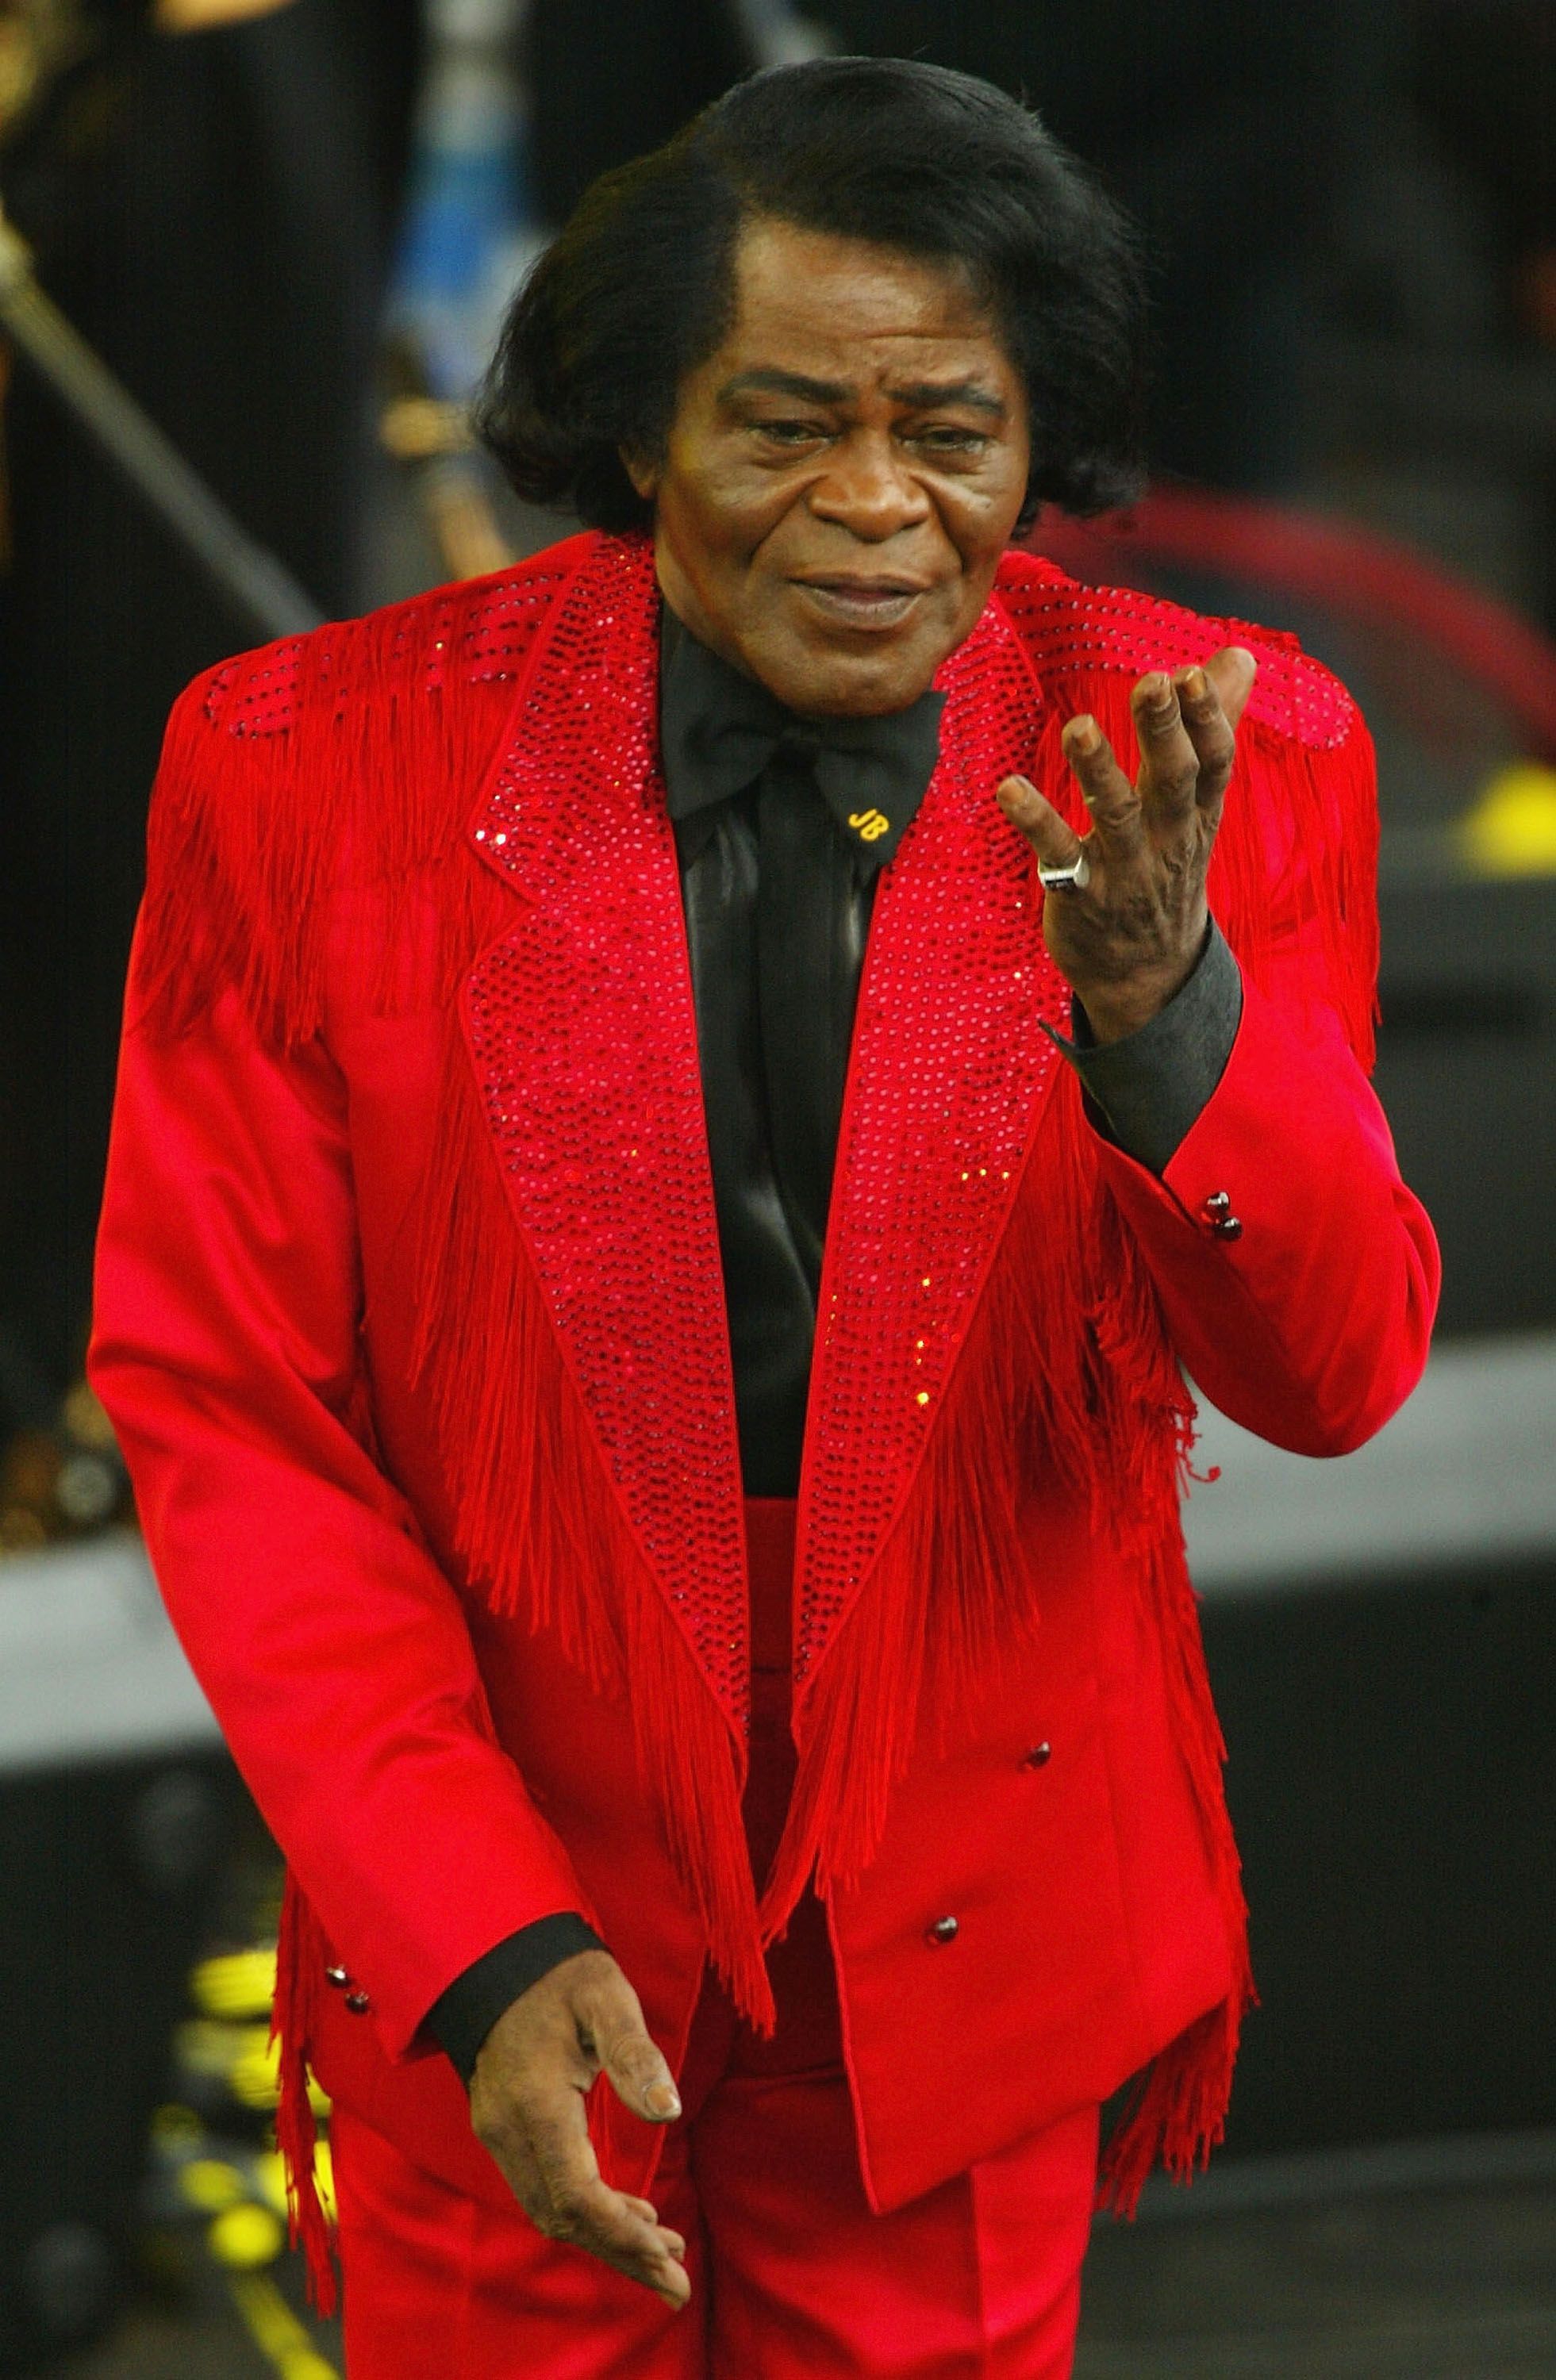 James Brown performs on stage at the Olympic Torch Concert held in The Mall on June 26, 2004 | Photo: Getty Images